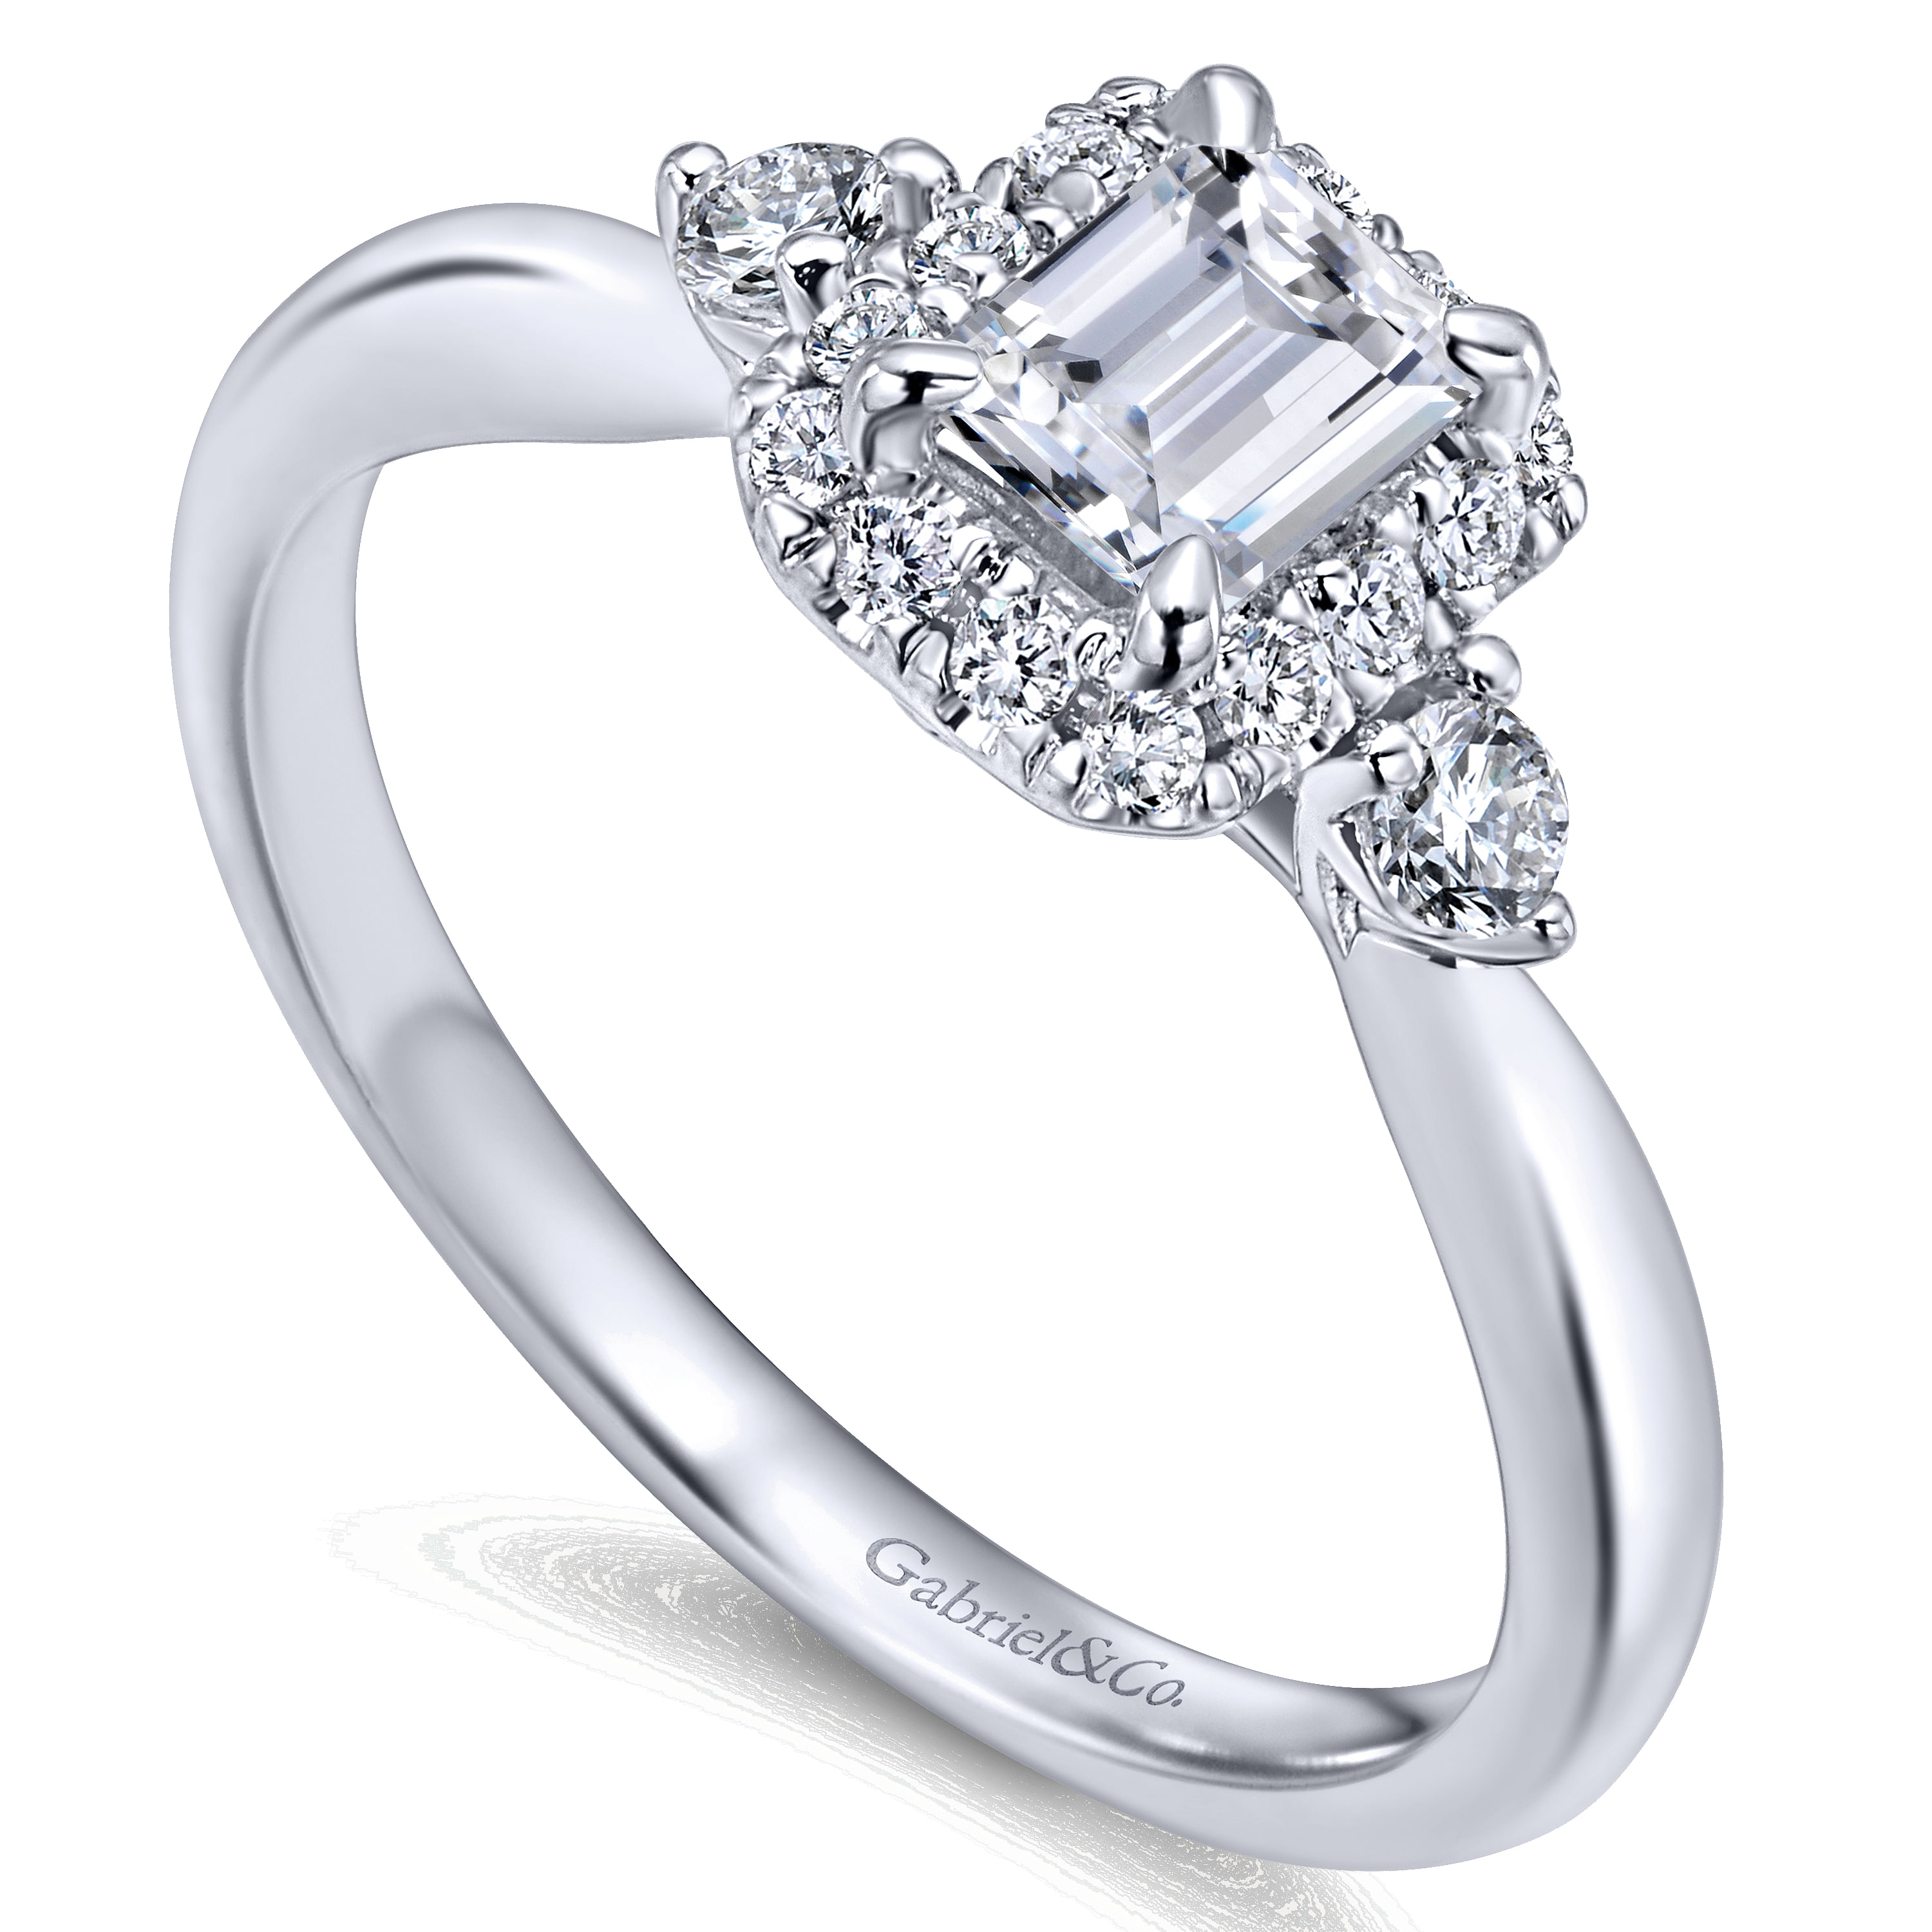 14K White Gold Emerald Cut Complete Diamond Engagement Ring